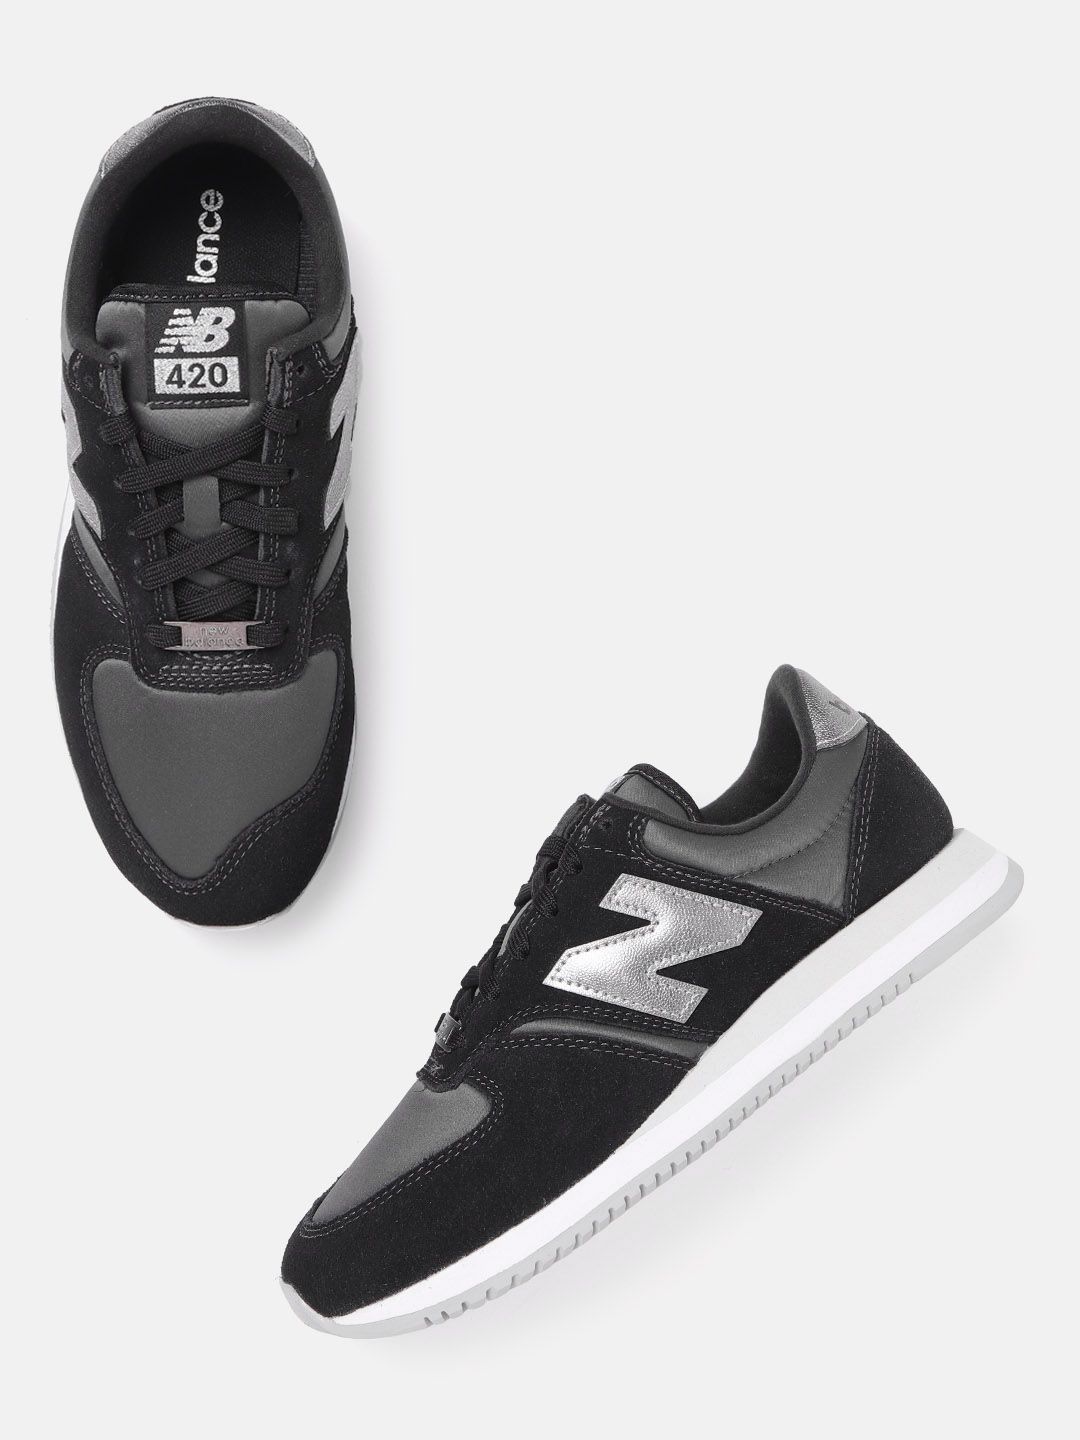 New Balance Women Black & Grey  Woven Design Running Shoes Price in India